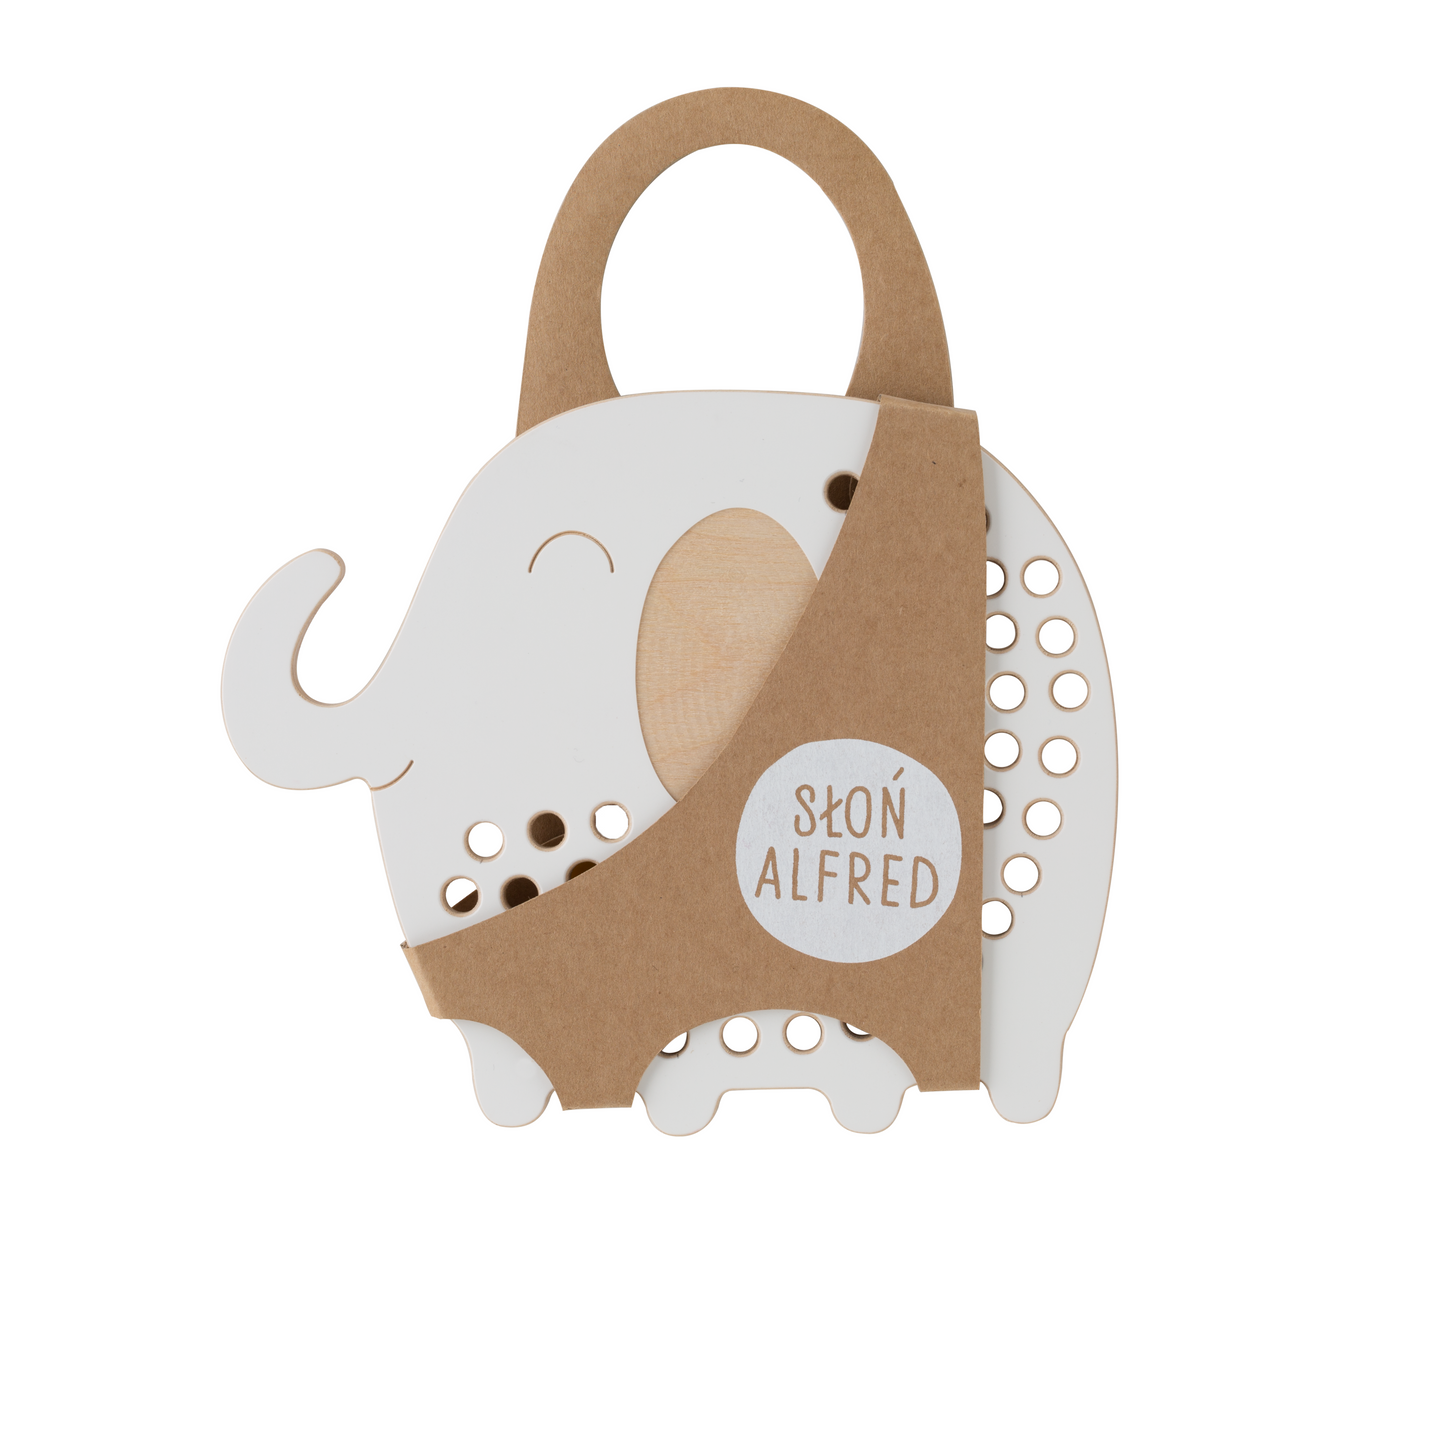 Oliver the elephant - Wooden lacing toy